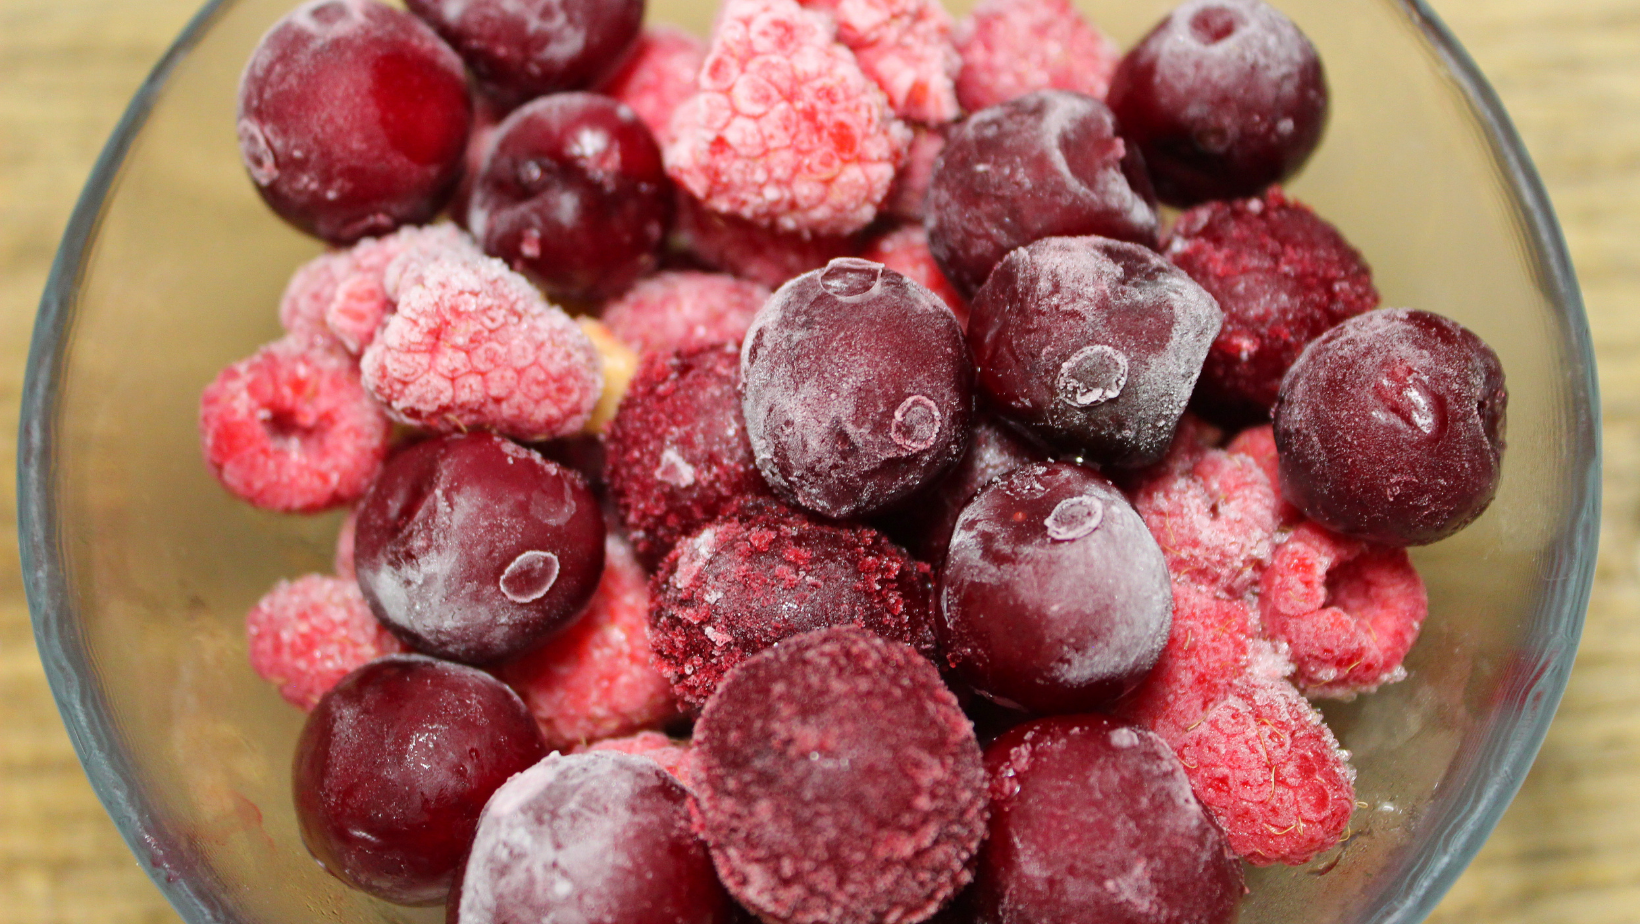 How to Defrost Frozen Fruits